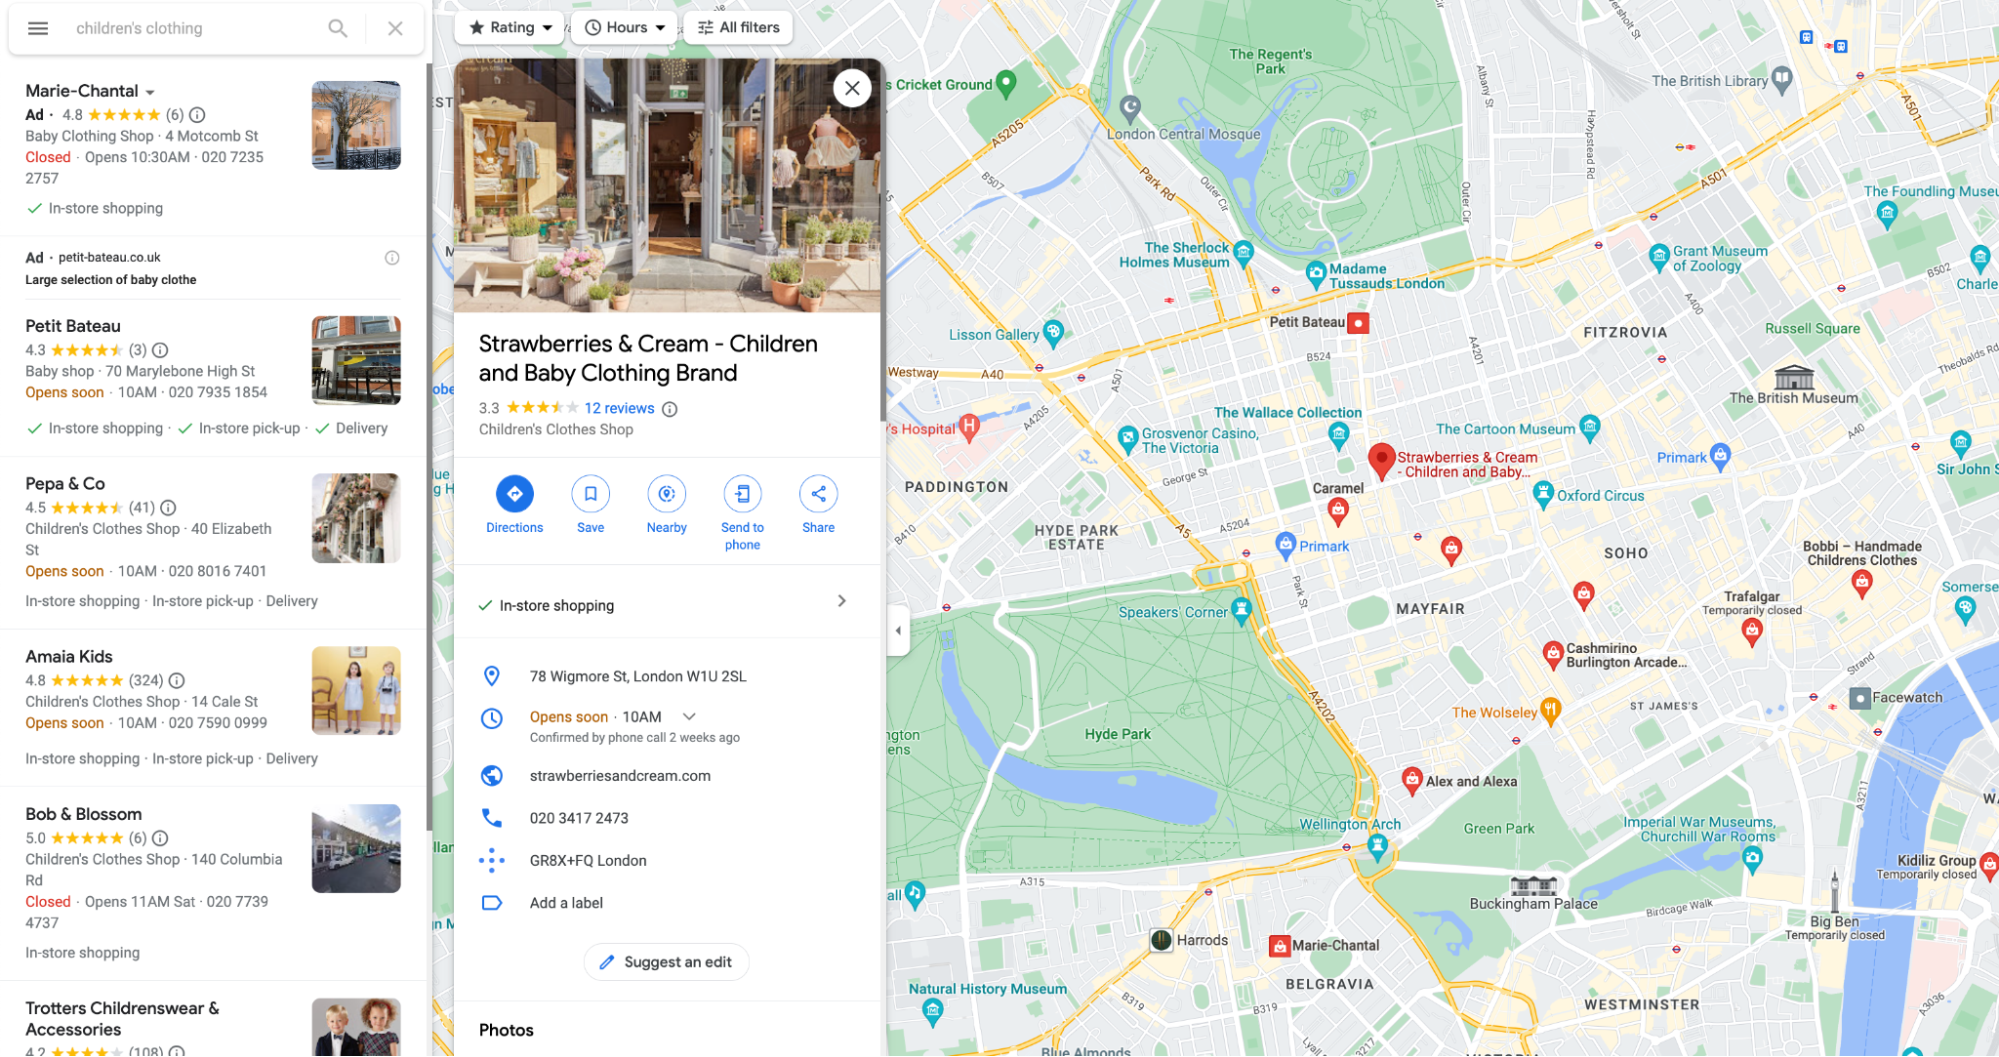 Google Maps results for “children’s clothing” showing a retailer in London.